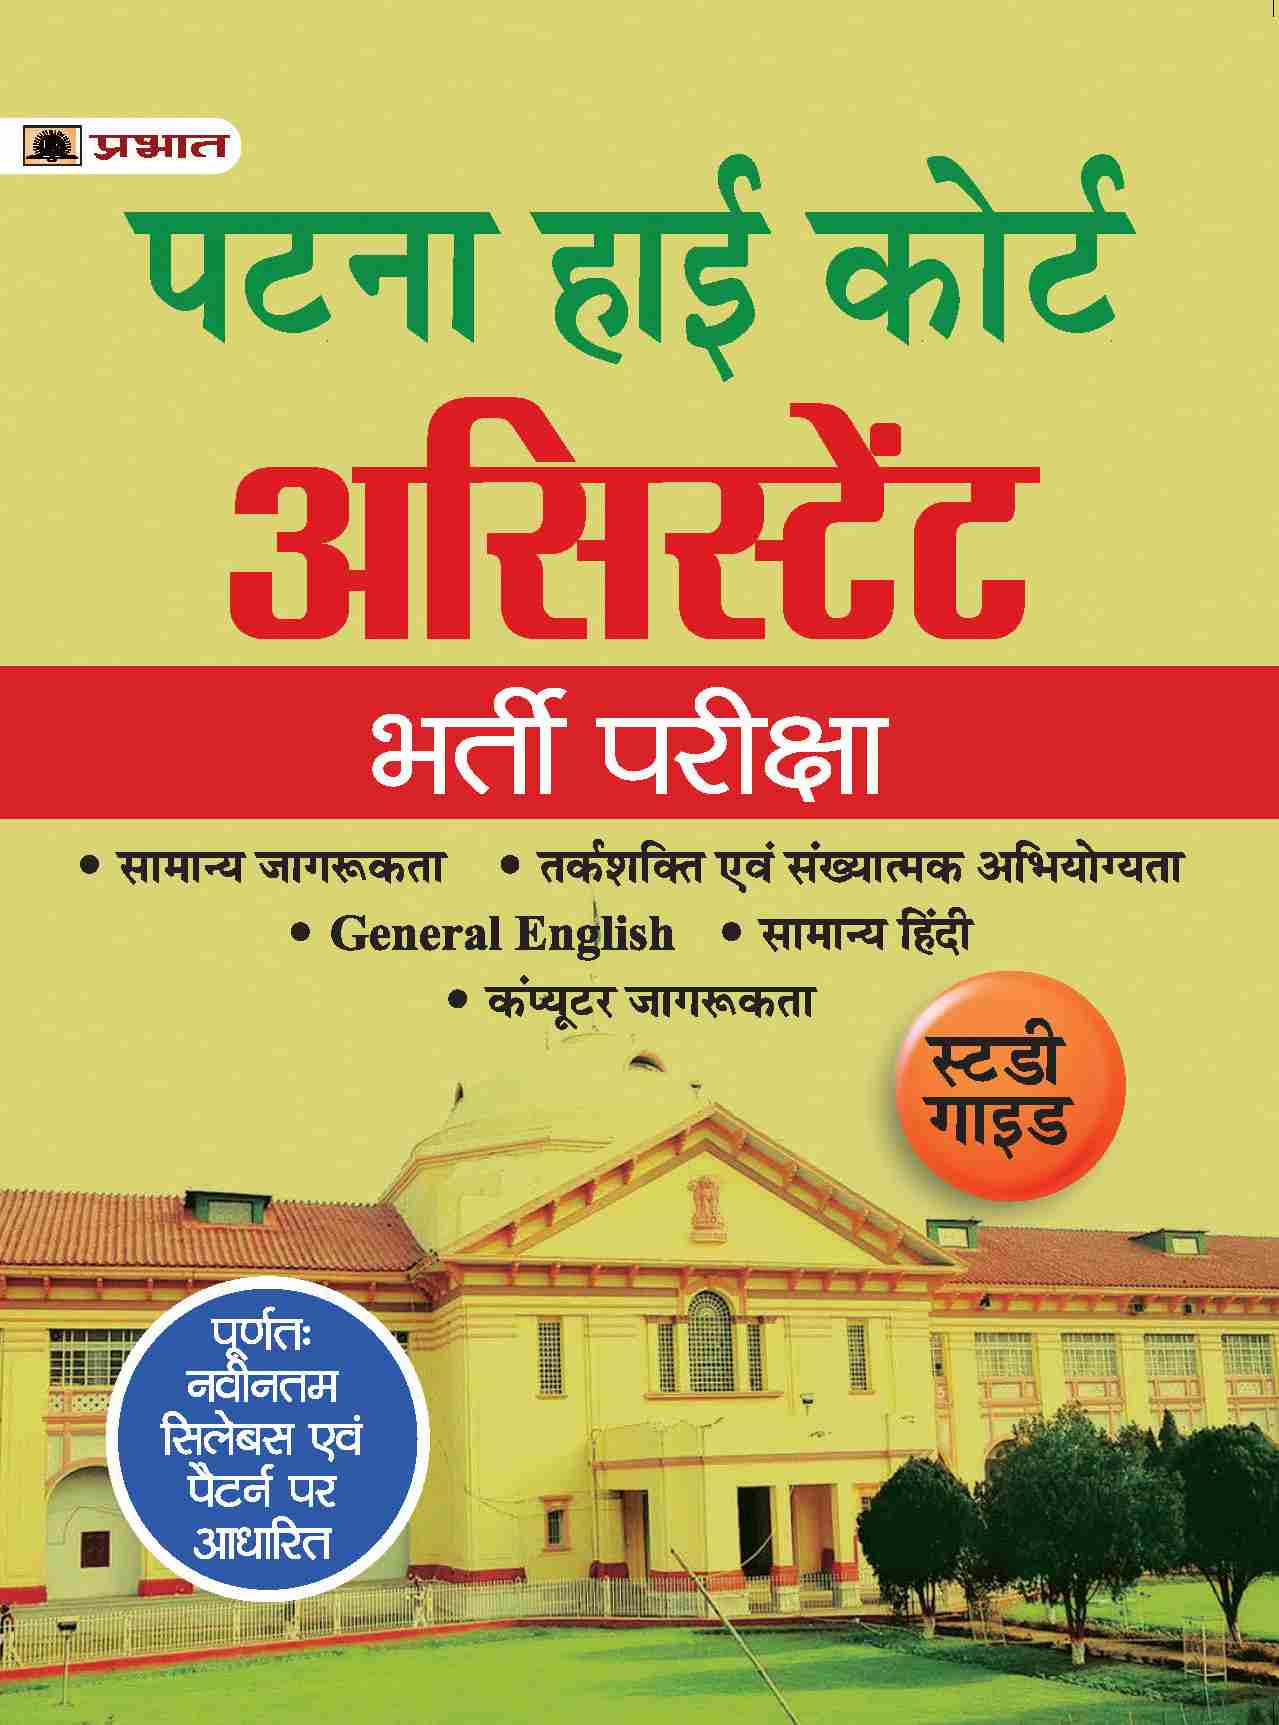 Patna High Court Assistant Recruitment Book (Complete Study Guide in Hindi) 